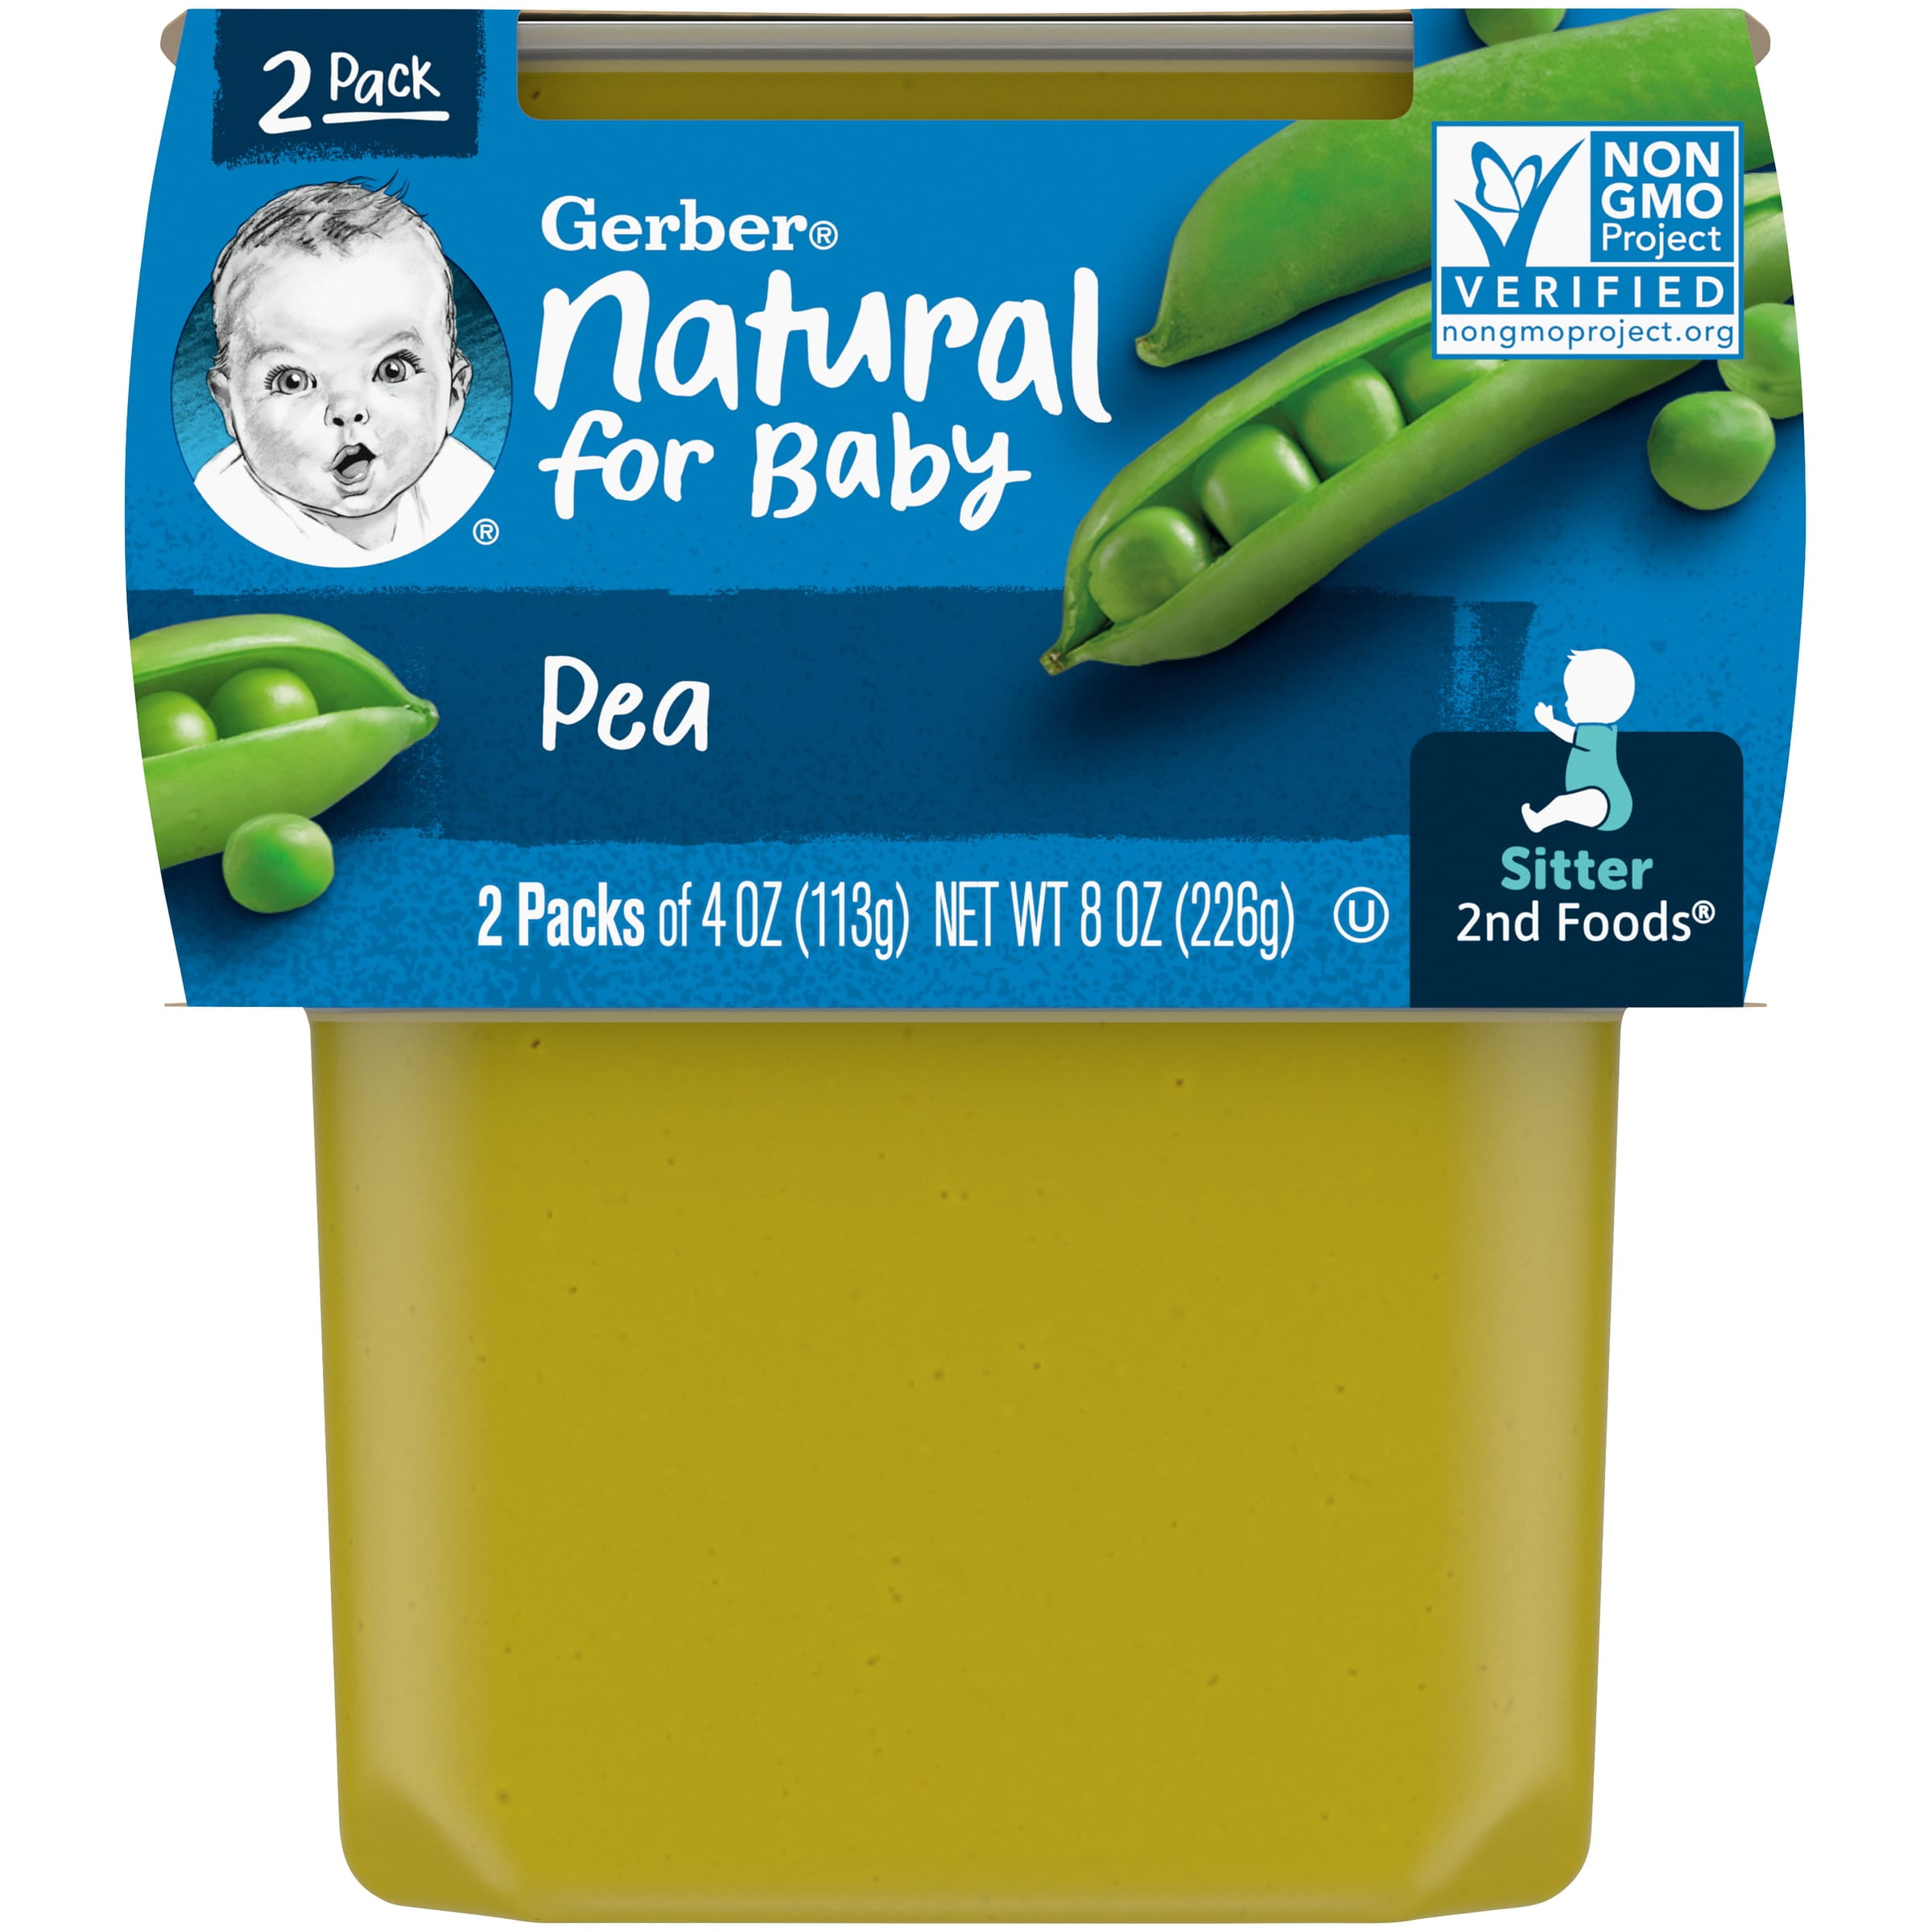 Gerber 2nd Foods Natural for Baby Baby Food, Pea, 4 oz Tubs (2 Pack